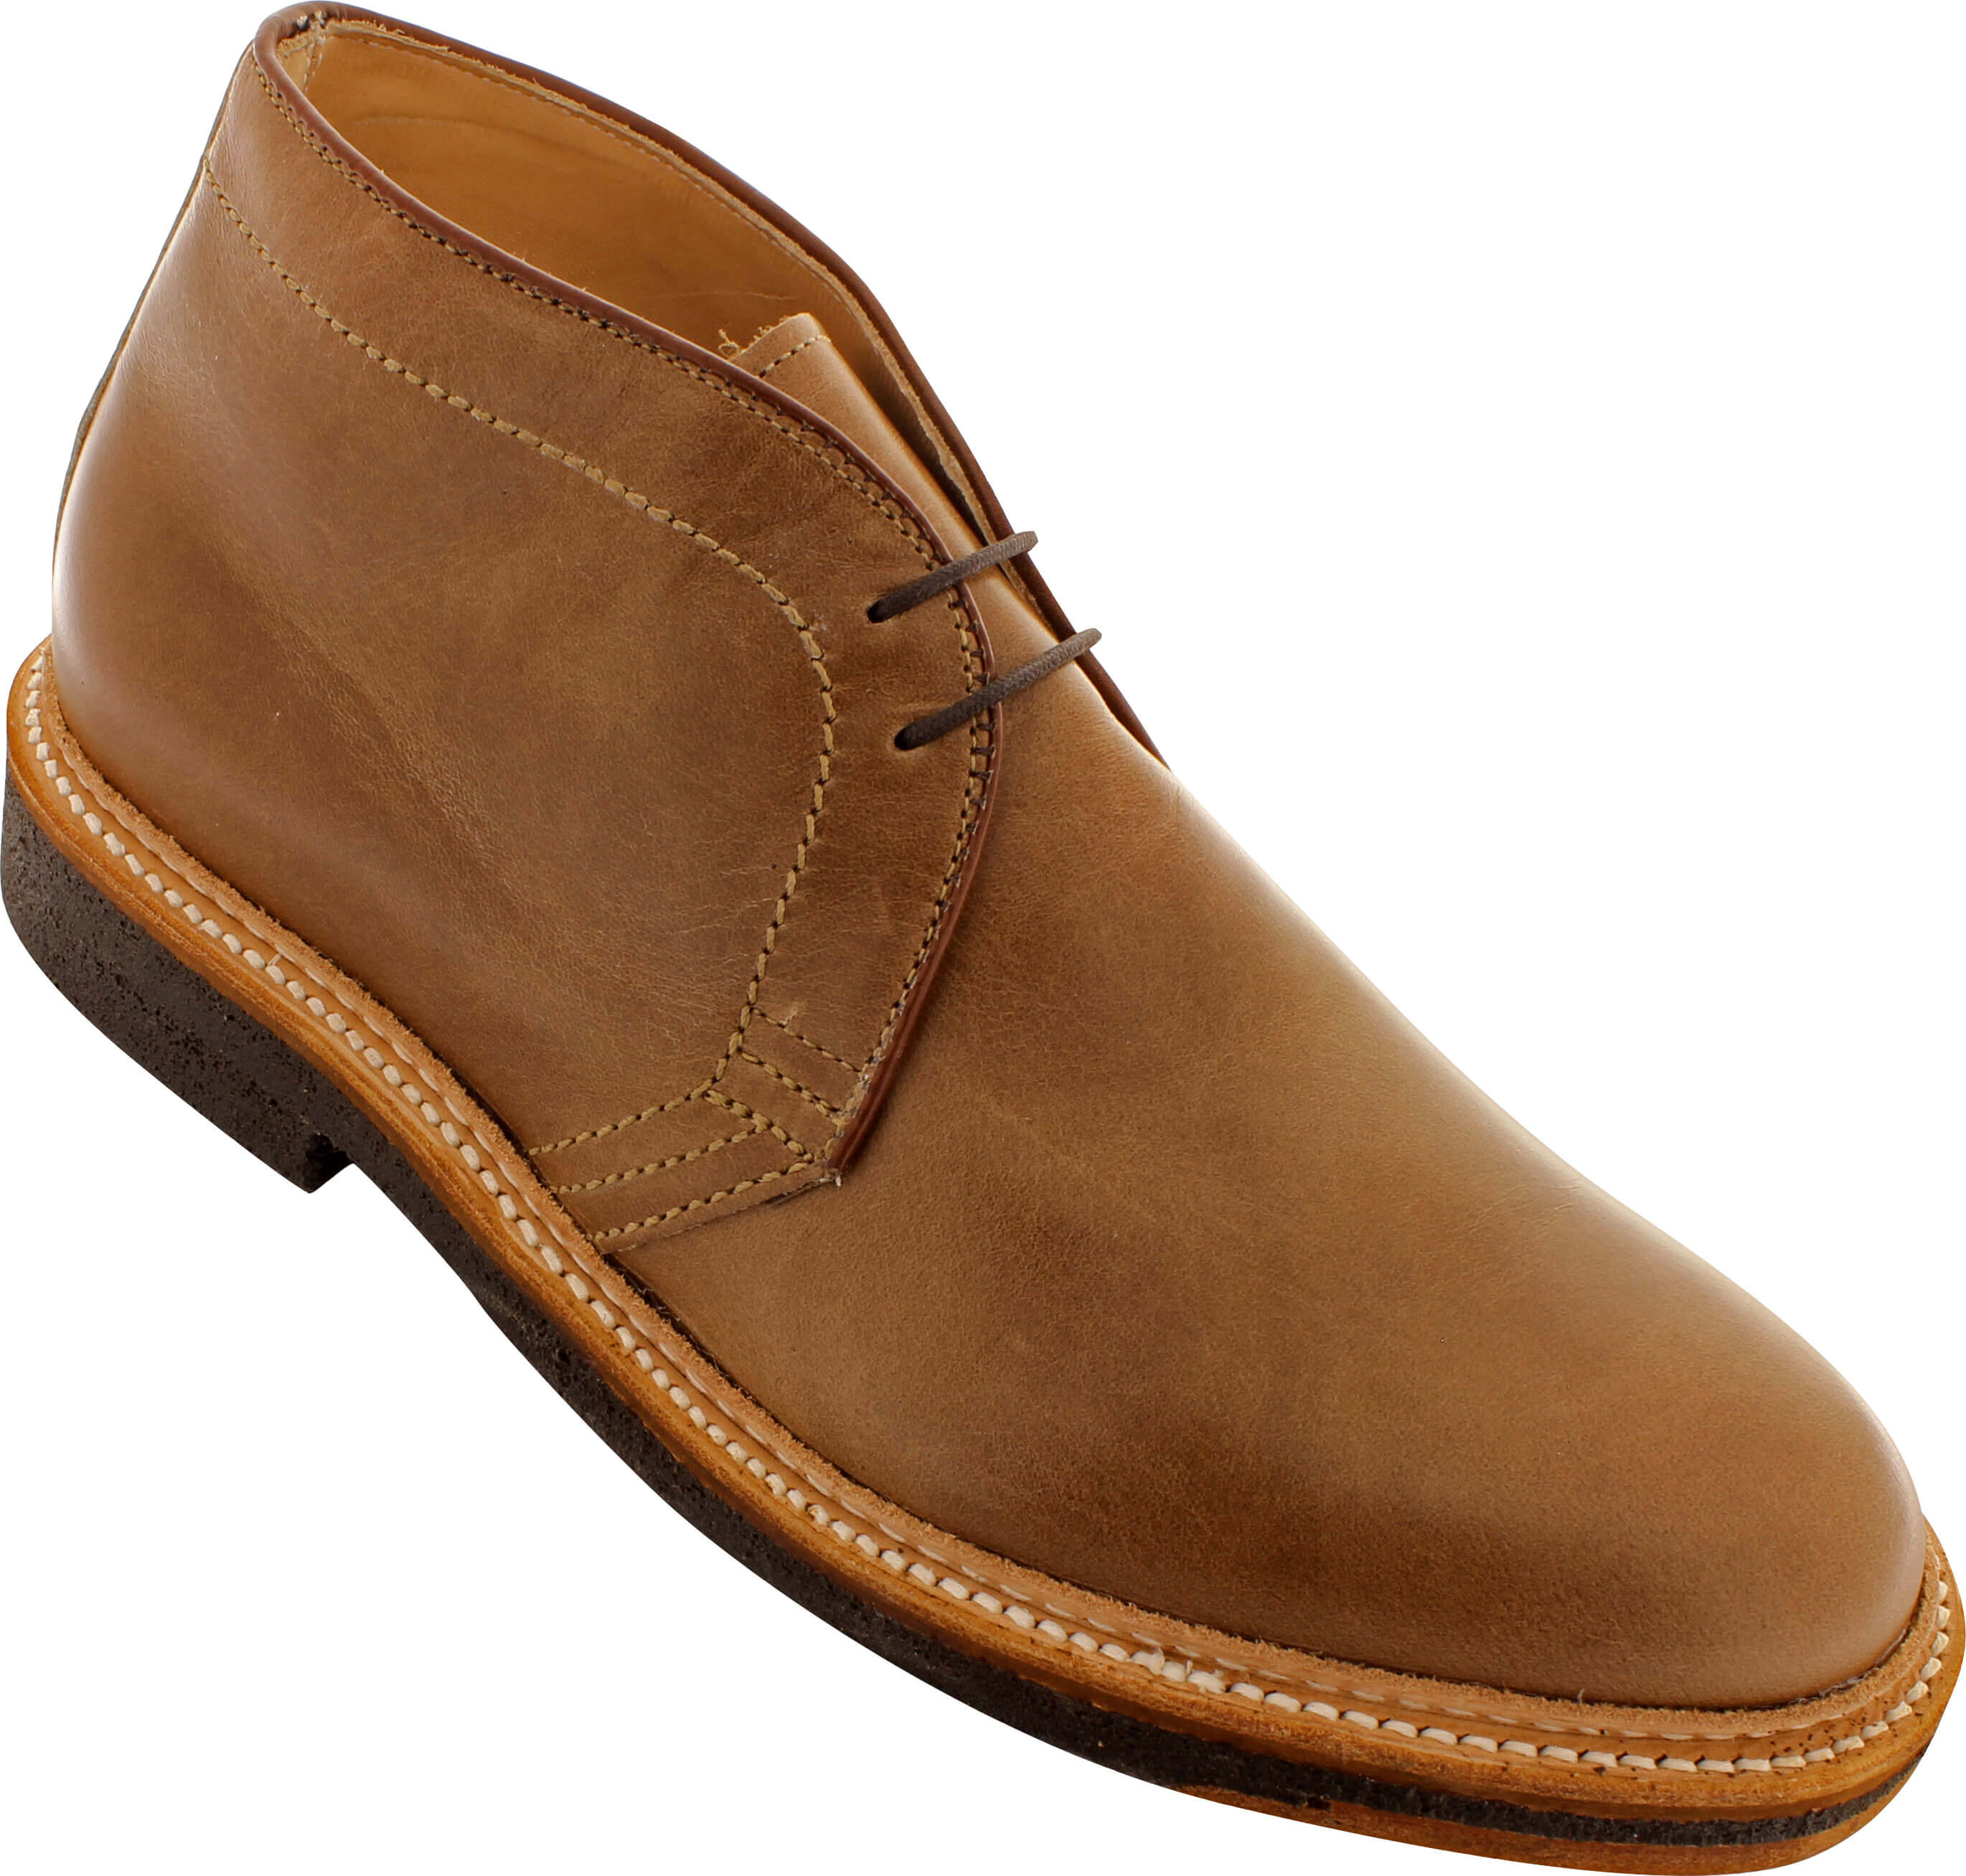 Alden Men's 13781 - Chukka Boot Leather Sole - Brown Chromexcel - The ...